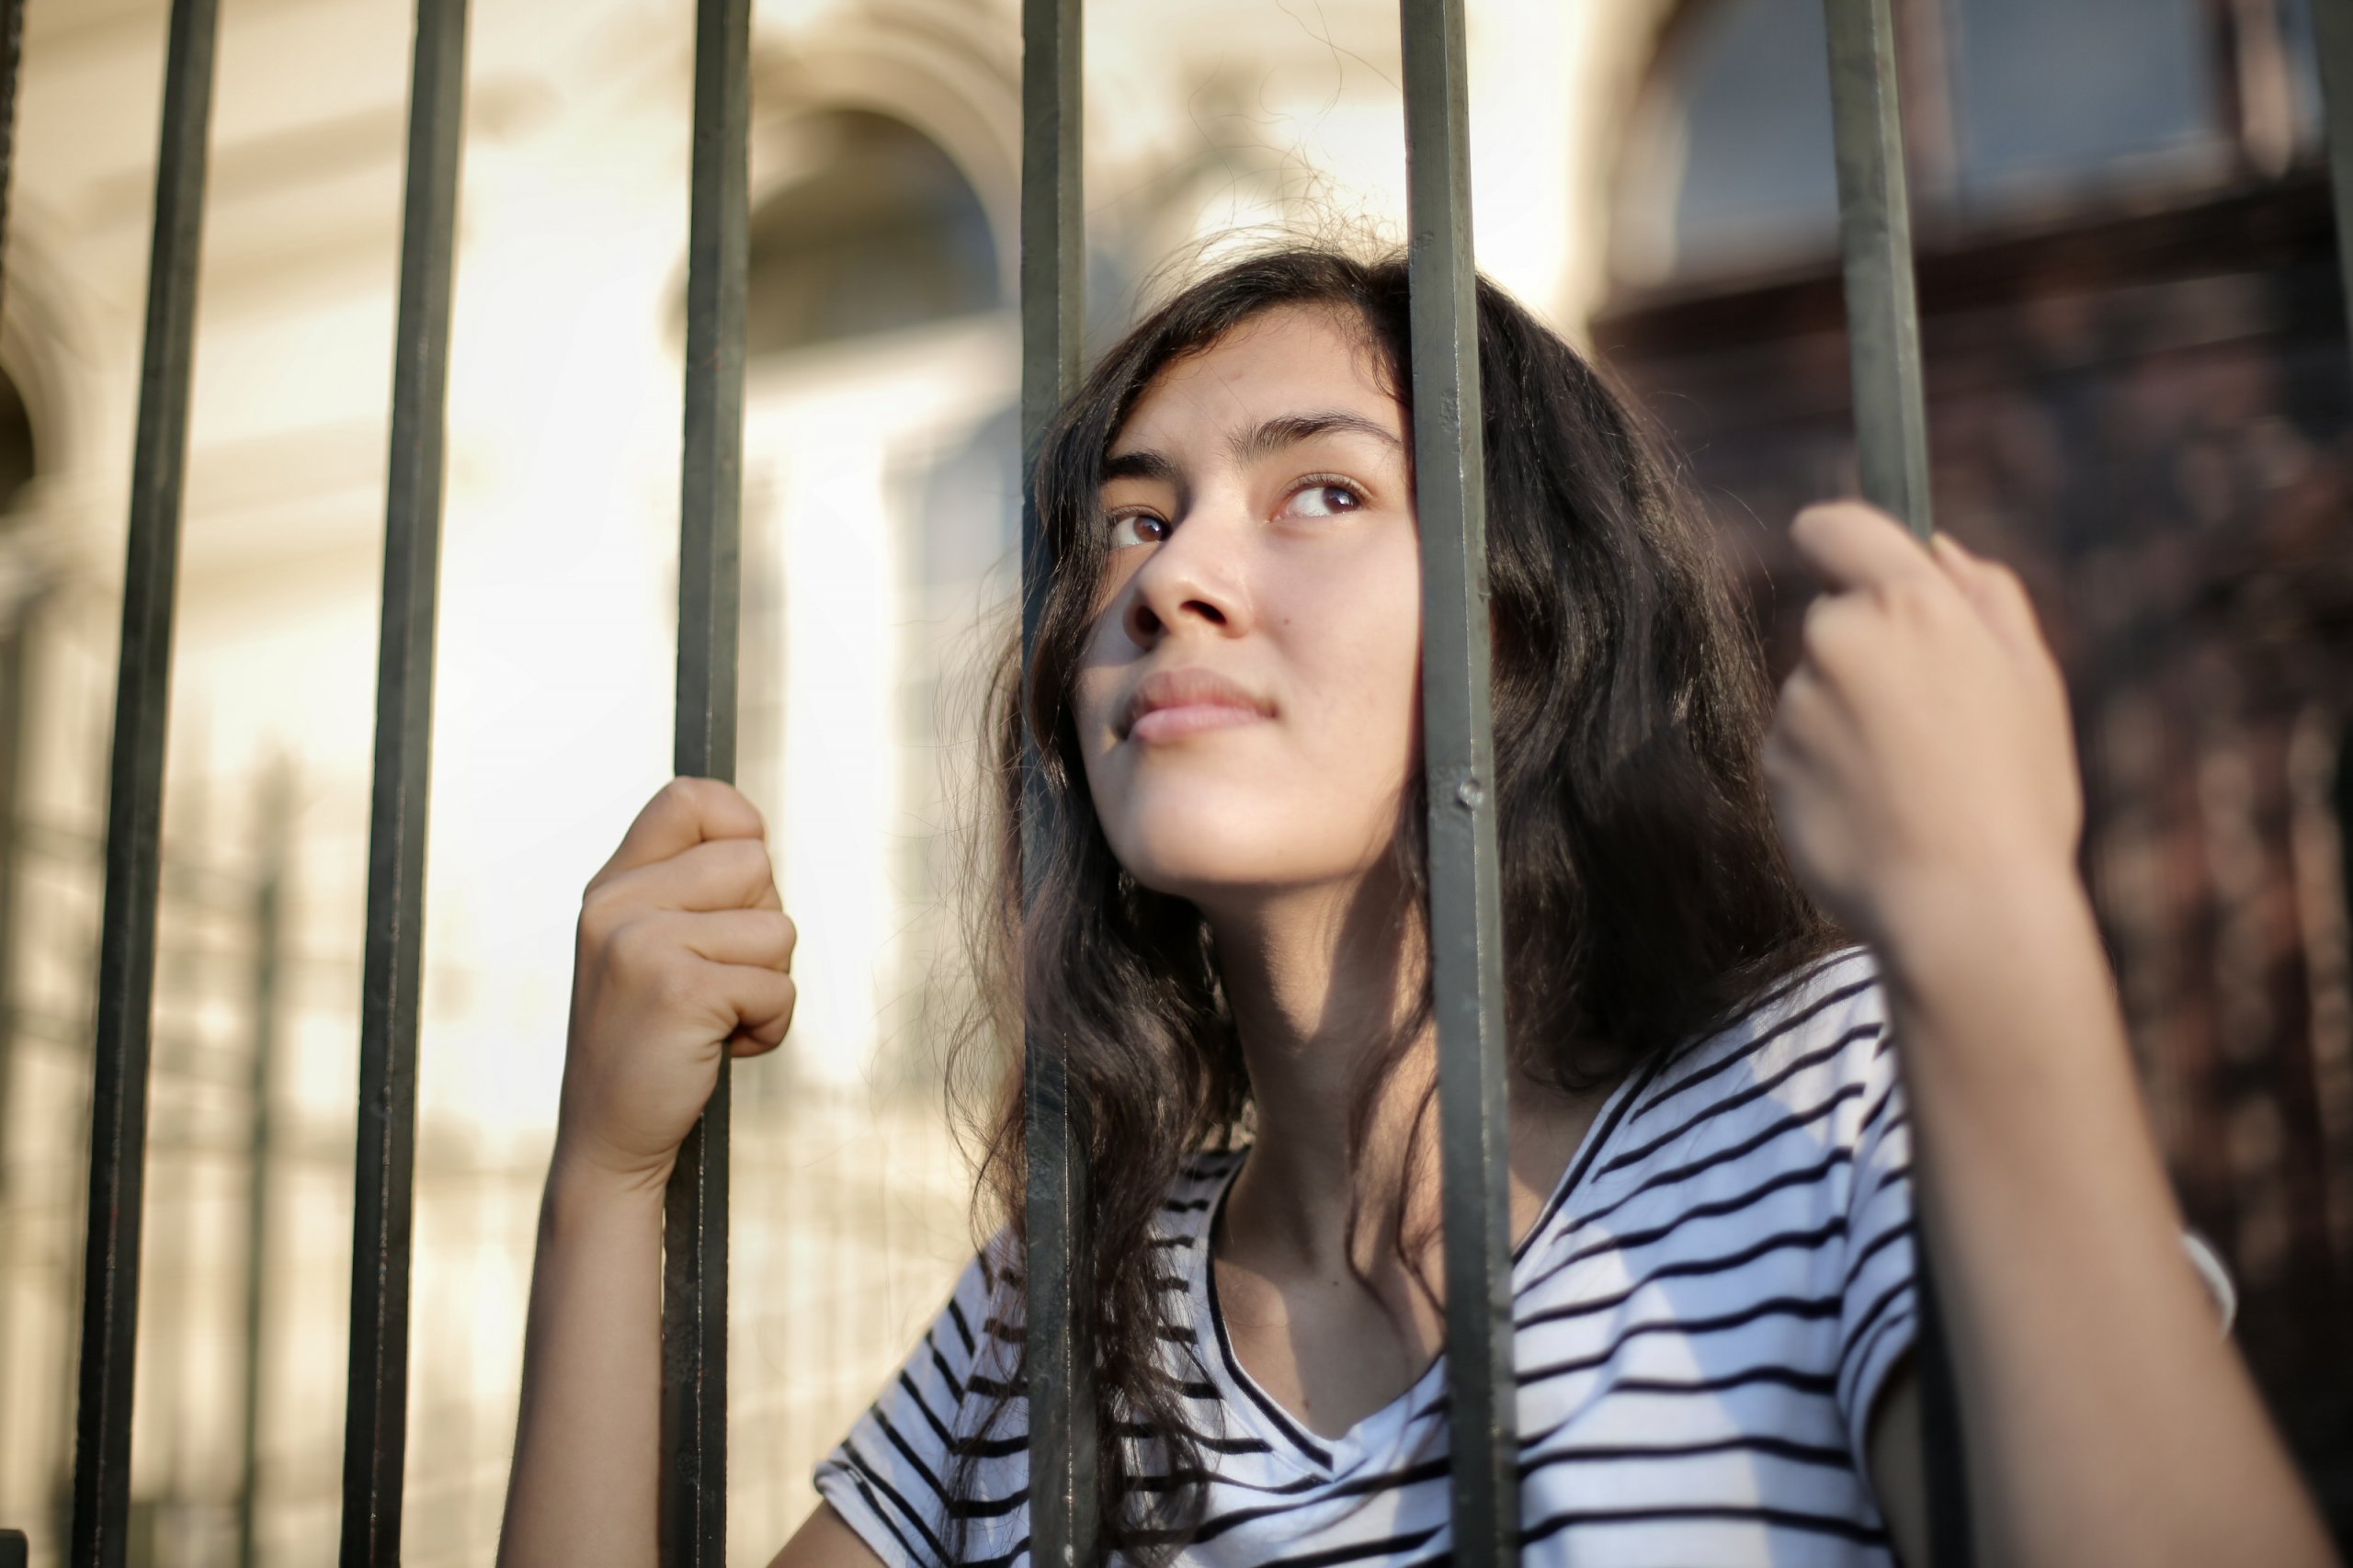 A young woman looks out thoughtfully through railings. Is she seeing an opportunity in crisis